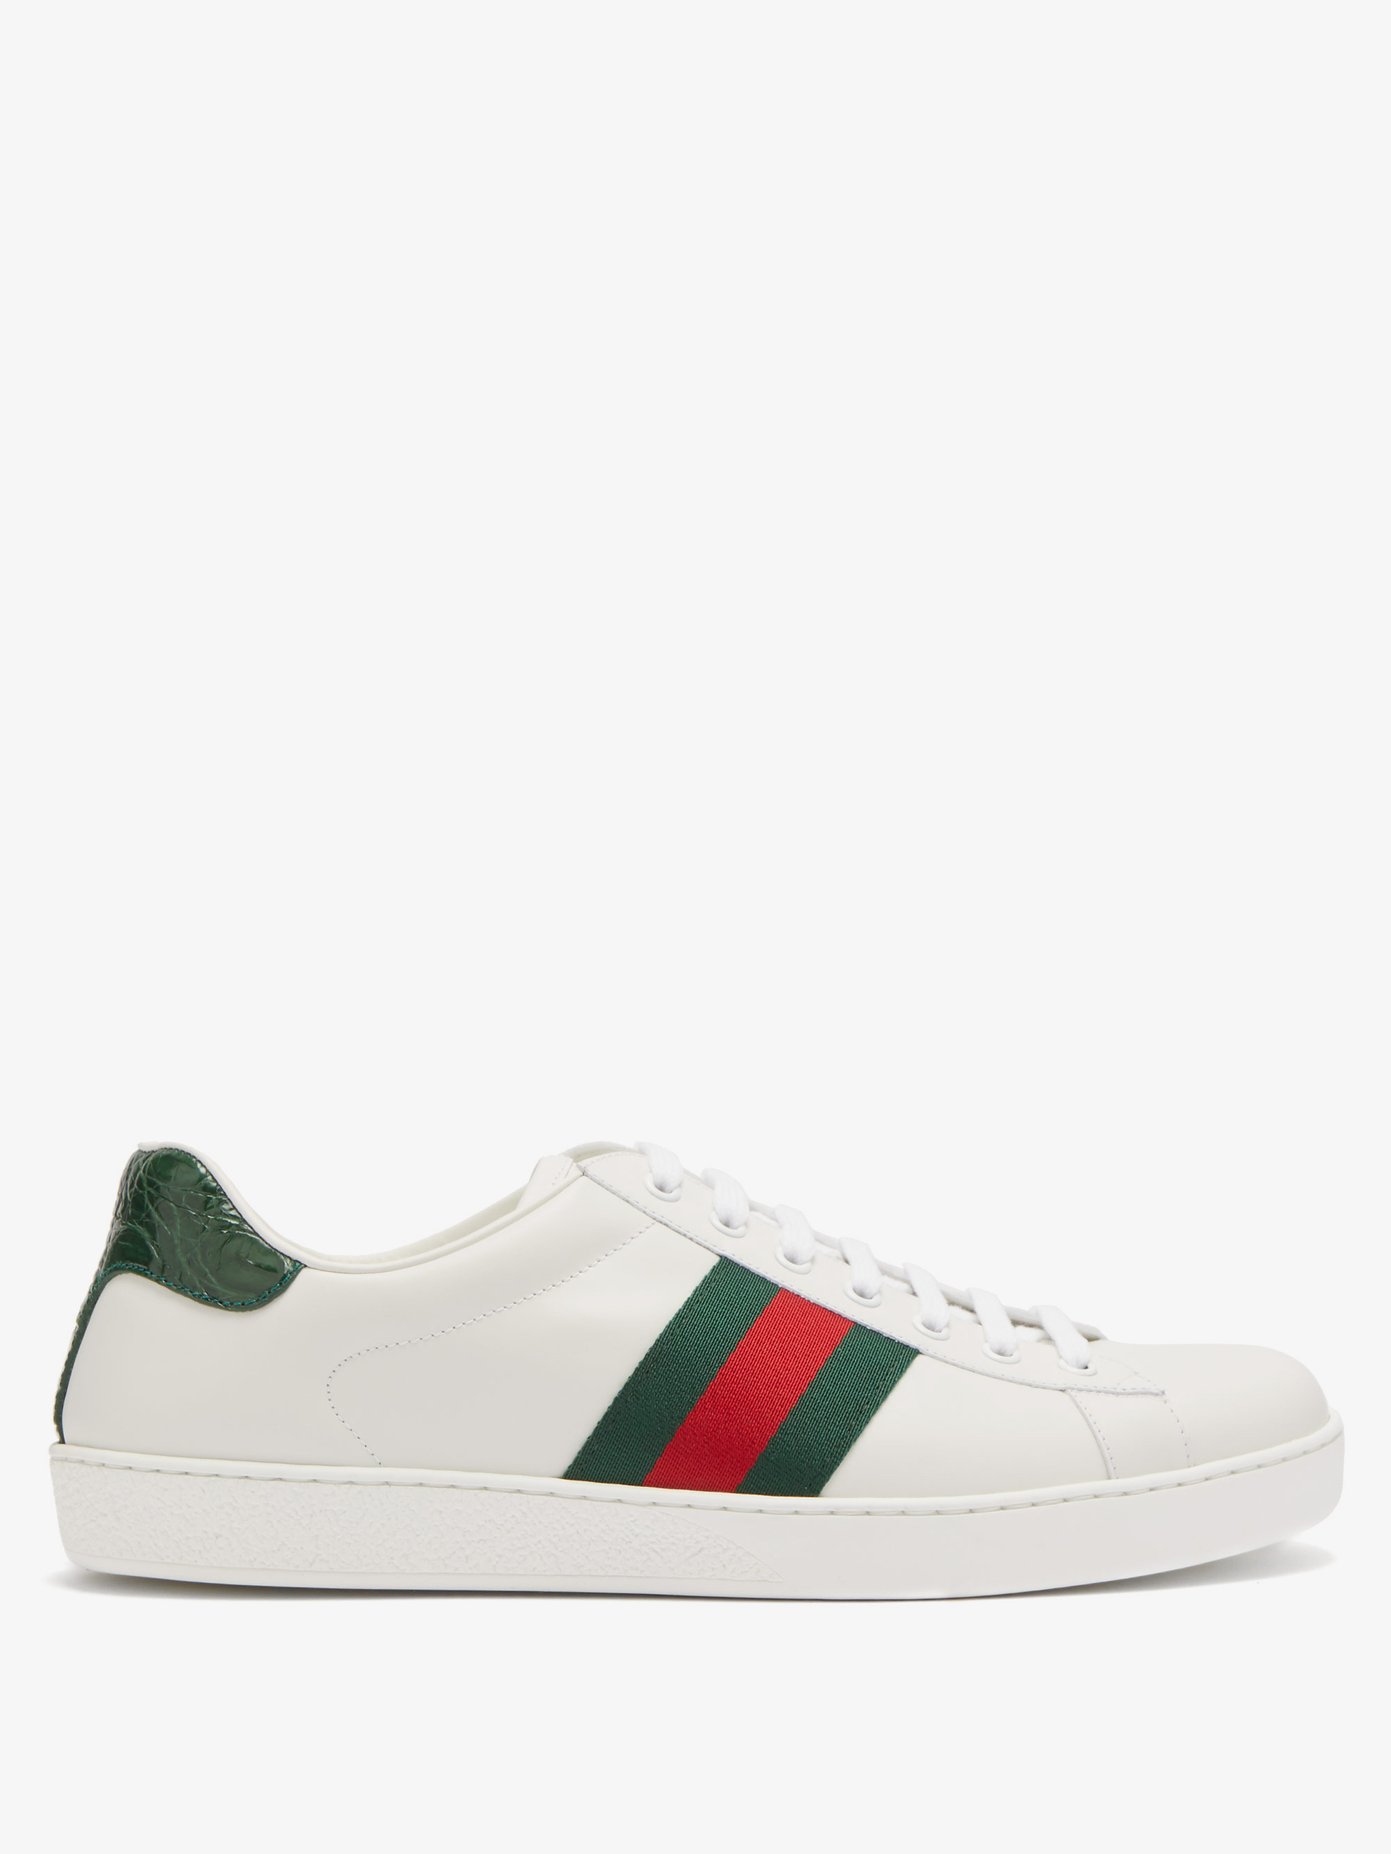 Ace leather trainers | Gucci 